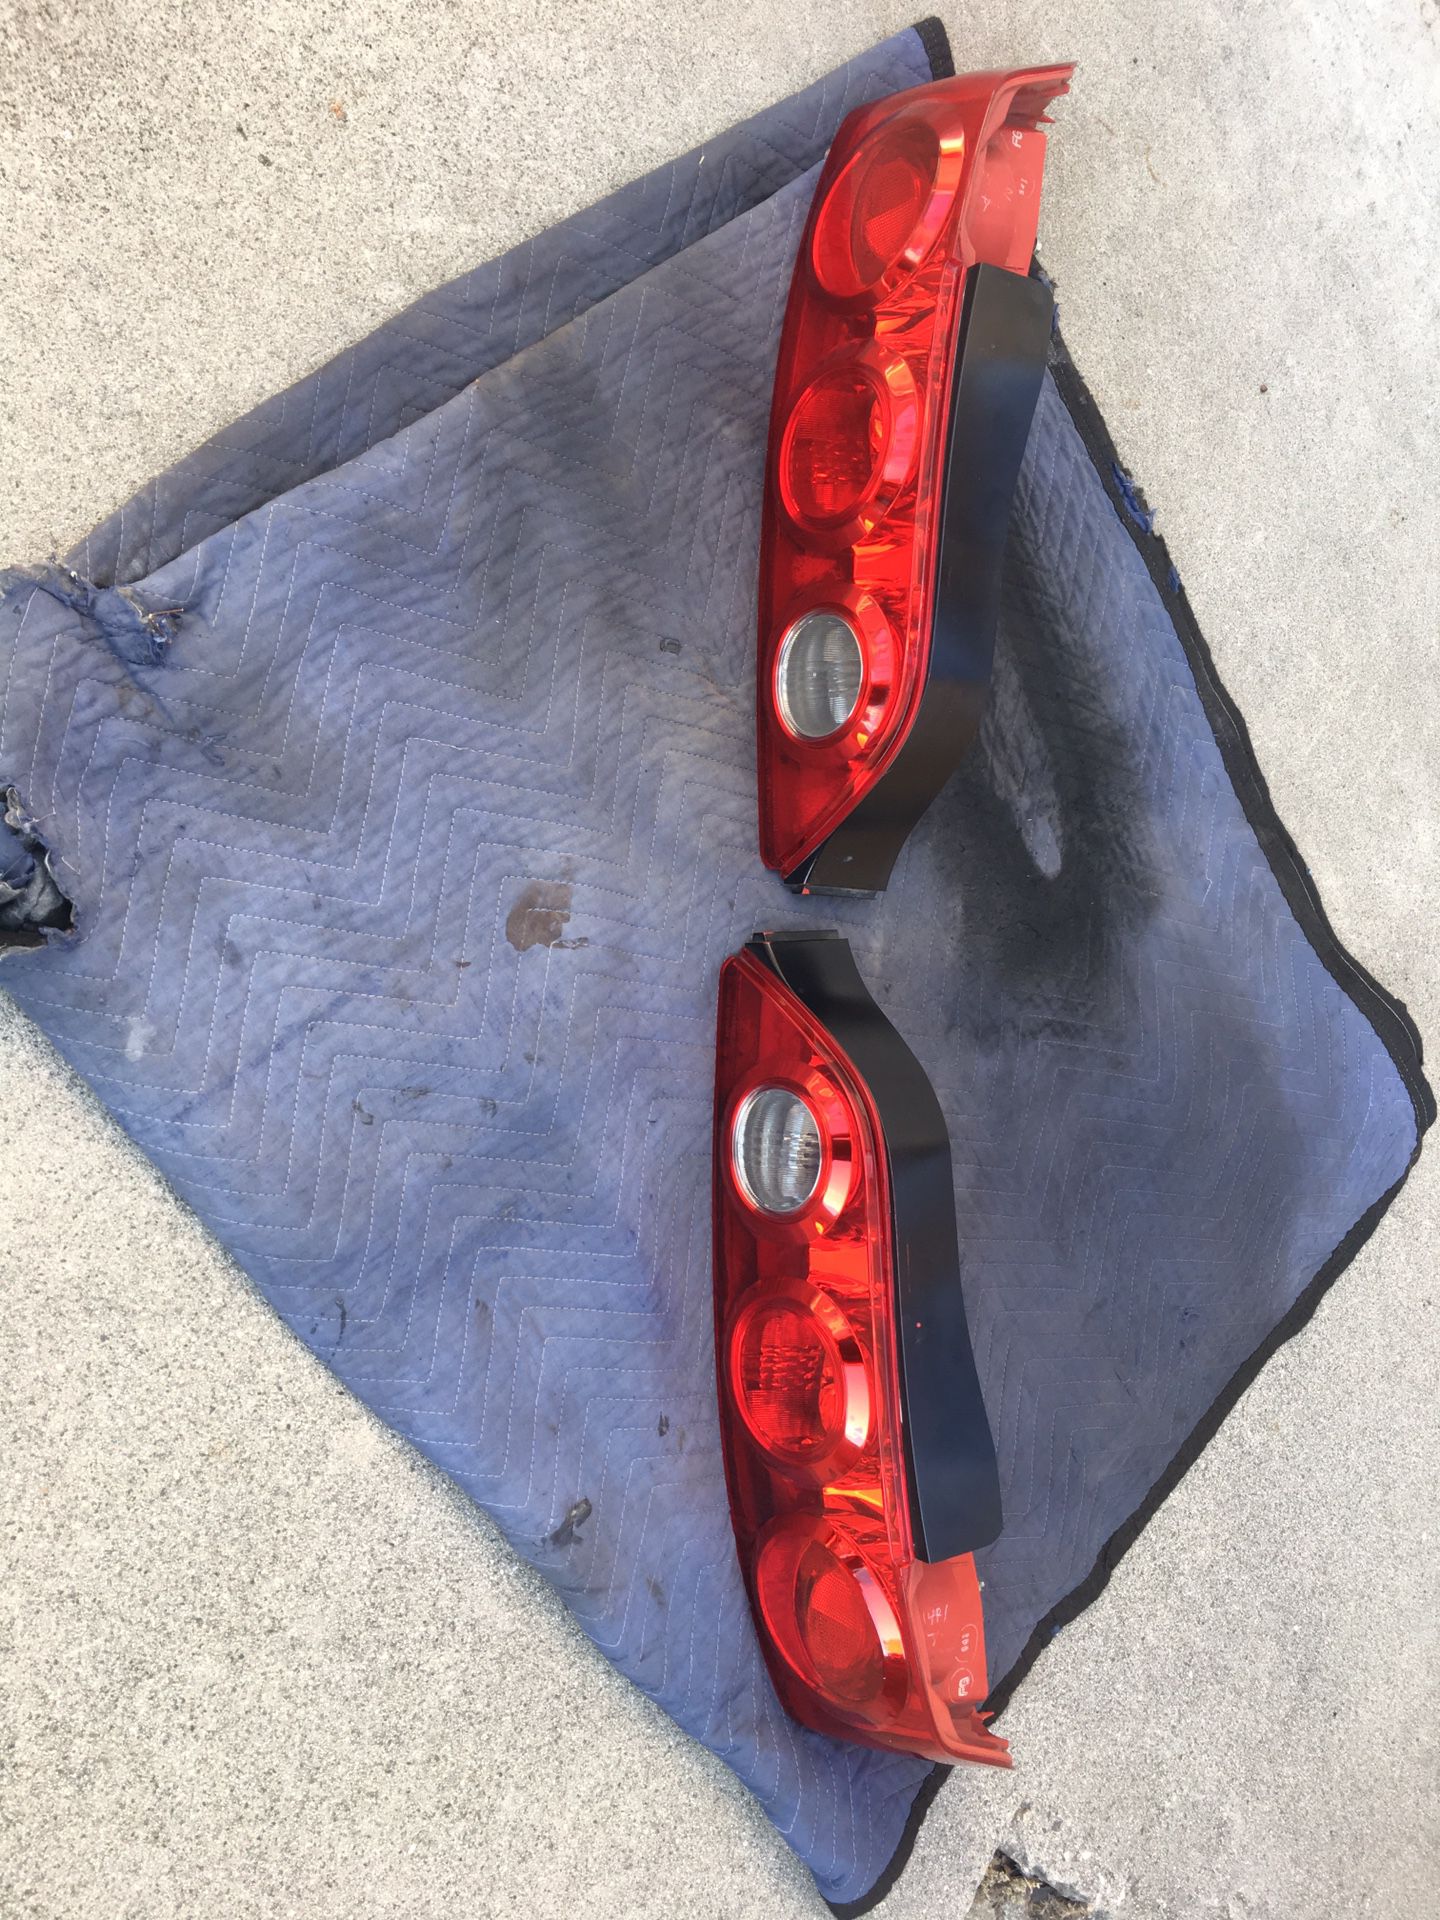 2005-2006 Acura Rsx Tail Lights Oem Honda Part-Asking $120.00 Firm